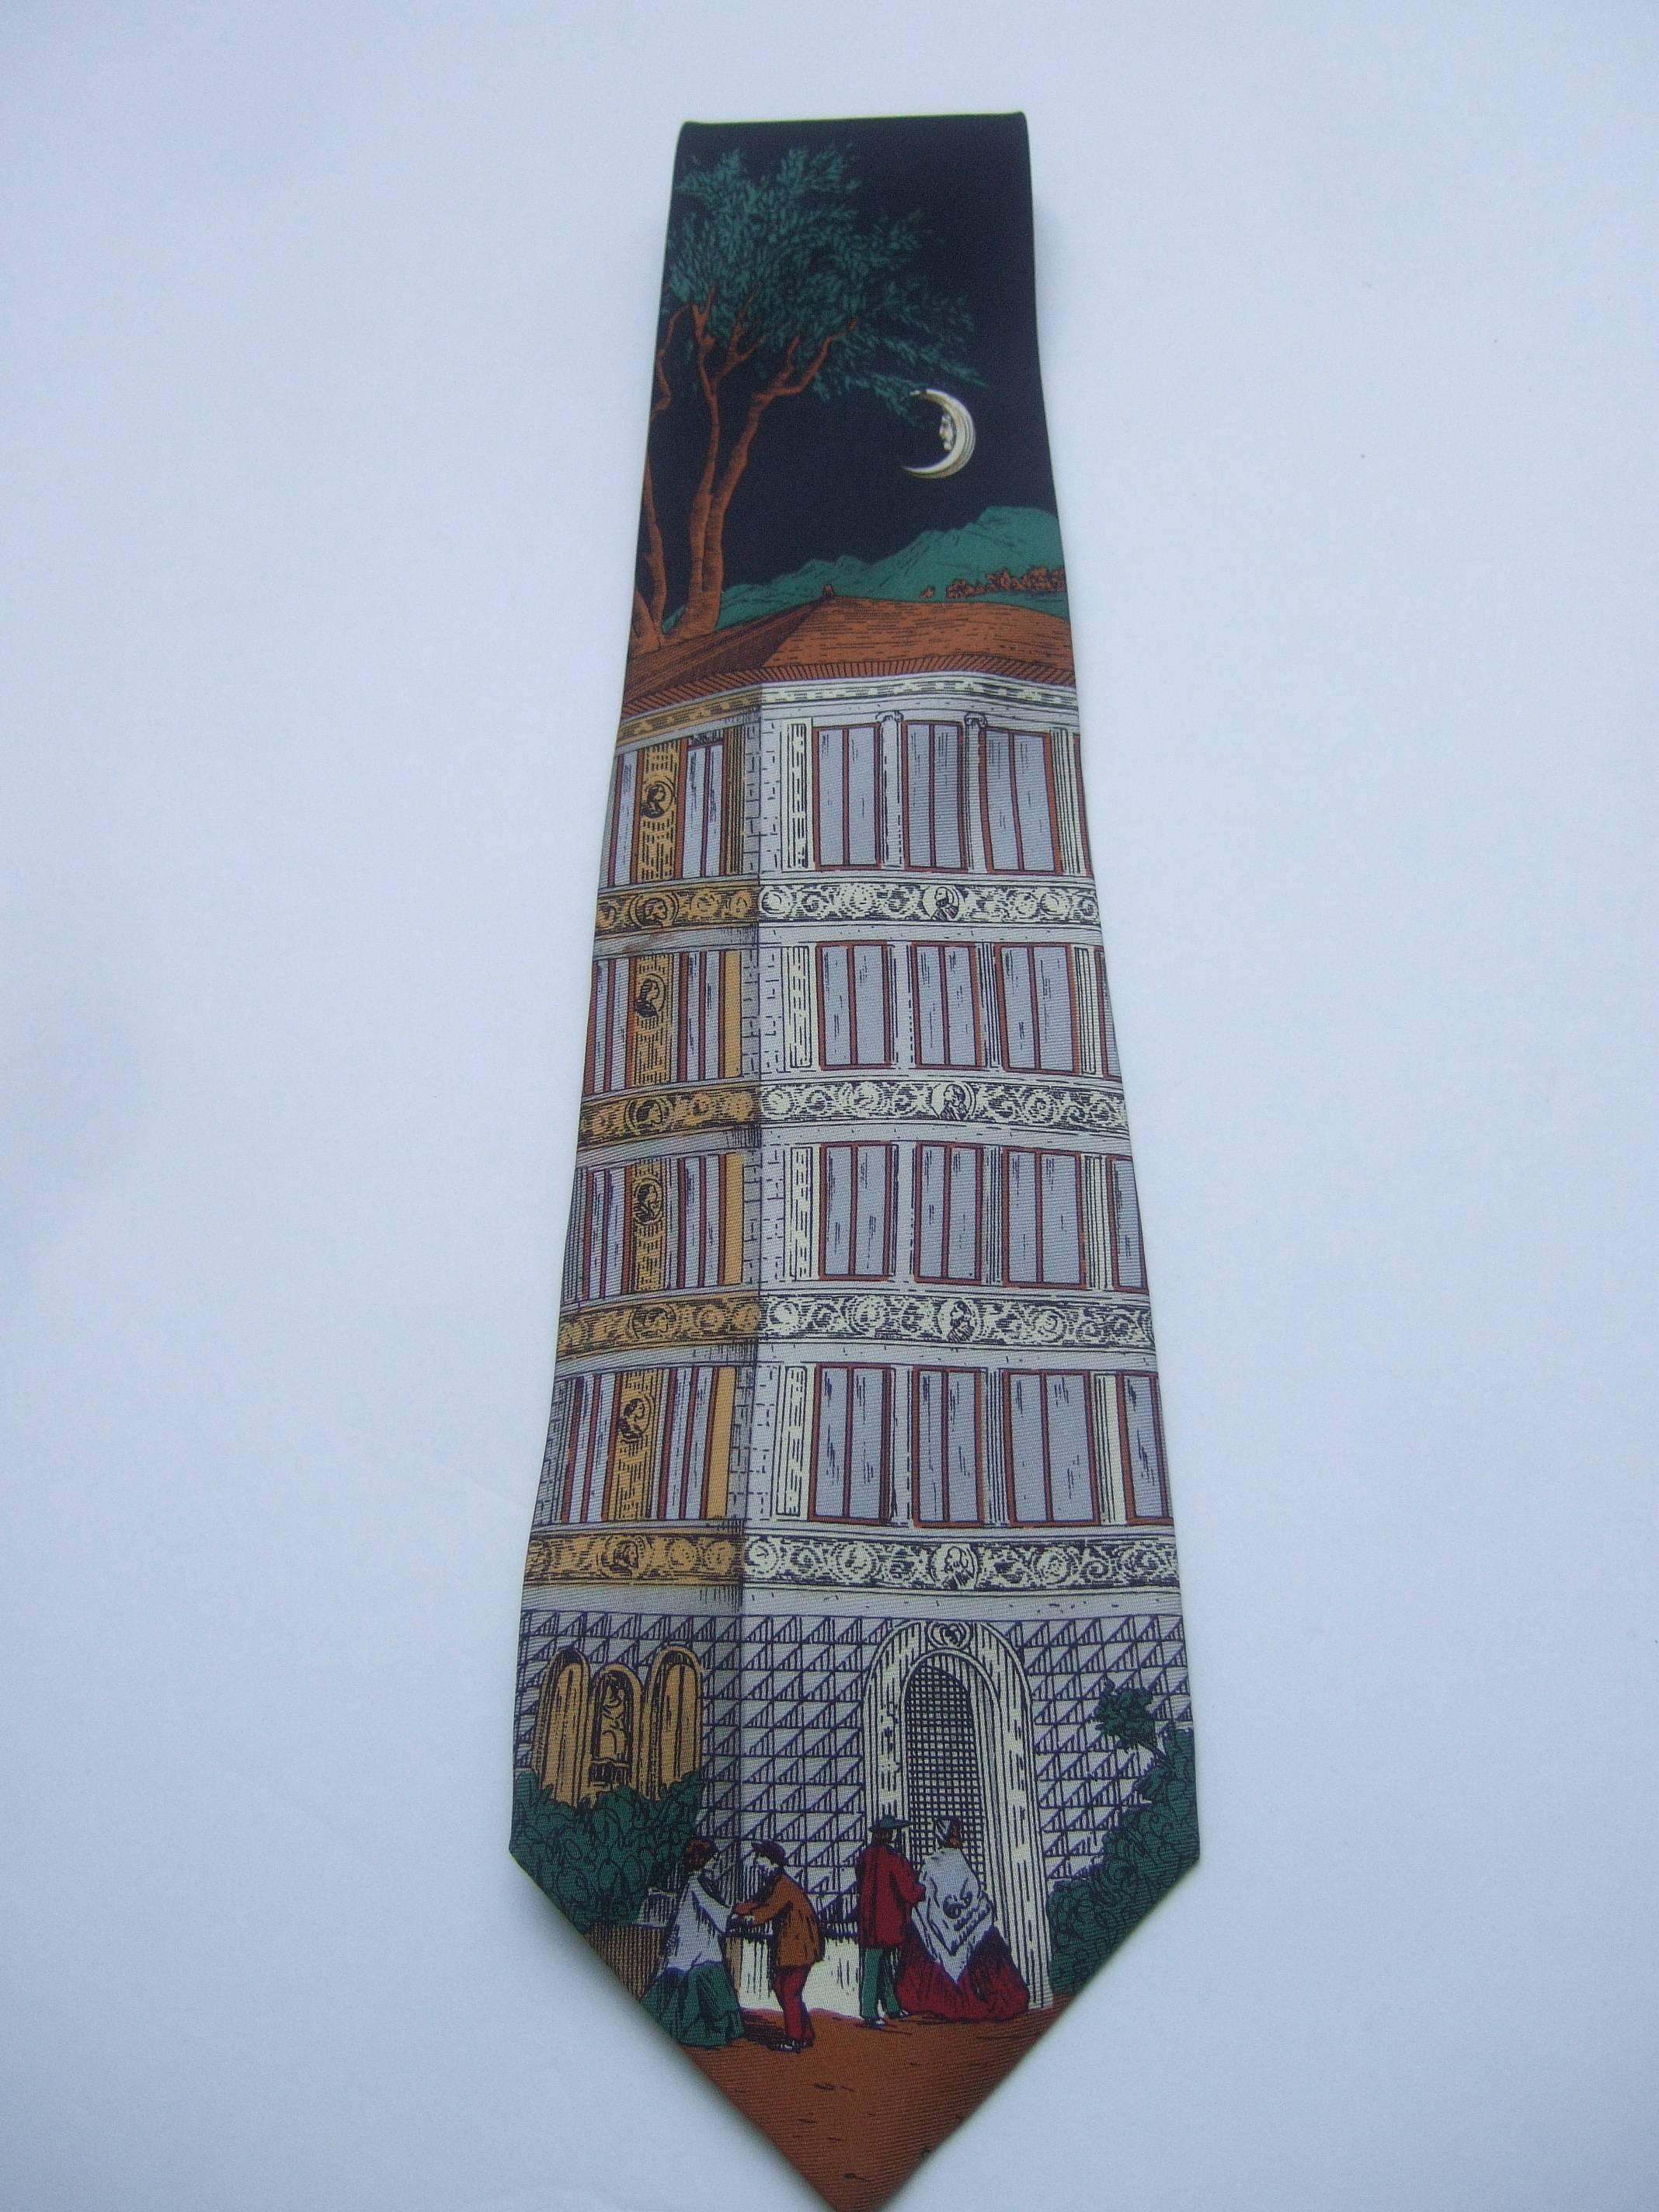 Fornasetti Italian graphic print silk necktie 
The designer necktie is illustrated with two
pairs of courting couples in front of a building
facade 

A crescent moon is glowing above the 
building with lush foliage in the background 
The silk